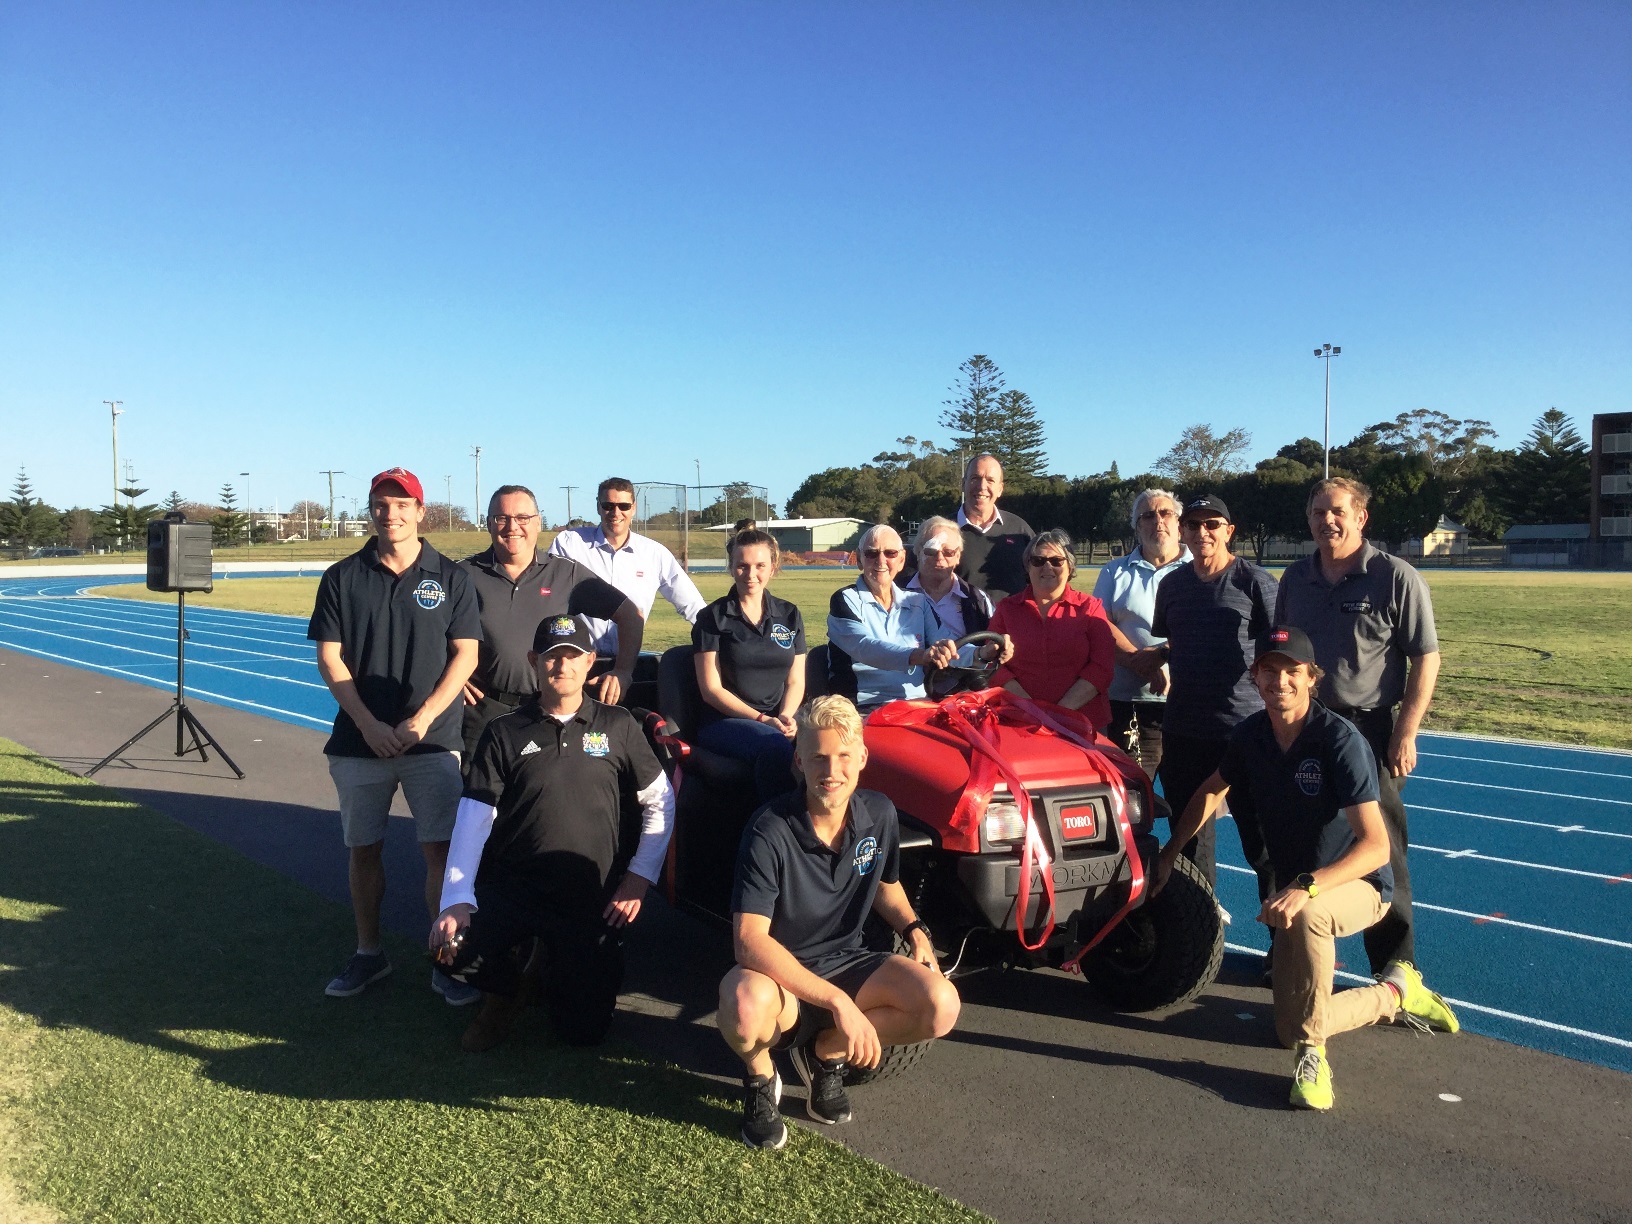 Fearnley Dawes Athletics track receives new Workman MDX from Toro Giving Program